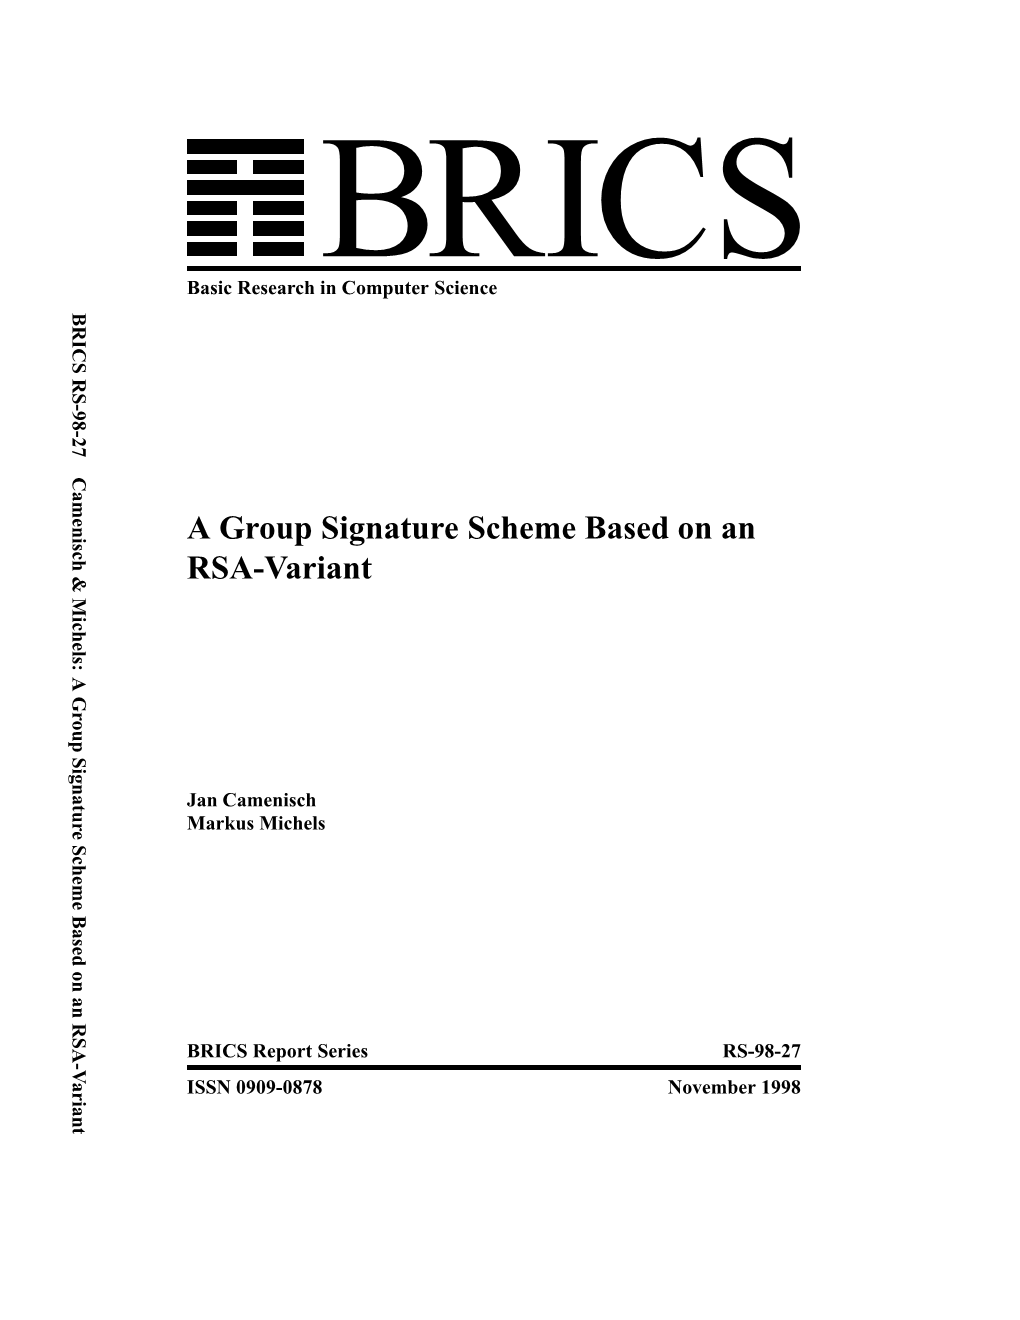 A Group Signature Scheme Based on an RSA-Variant Copyright C 1998, BRICS, Department of Computer Science University of Aarhus